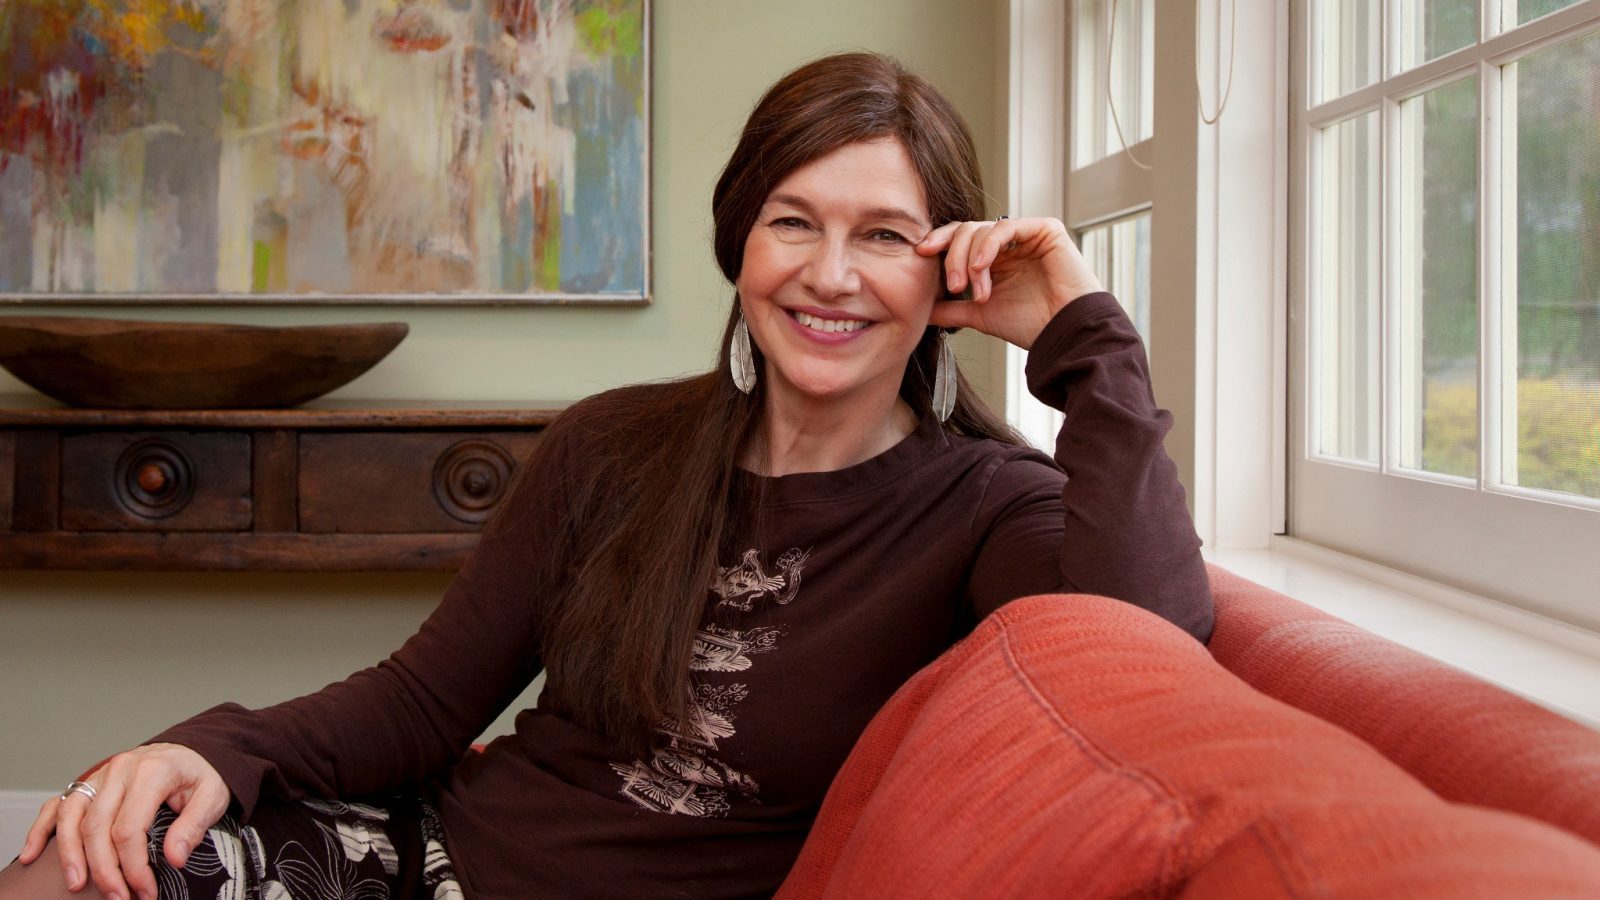 Pulitzer Prize winning author, Louise Erdrich, sitting on a red sofa